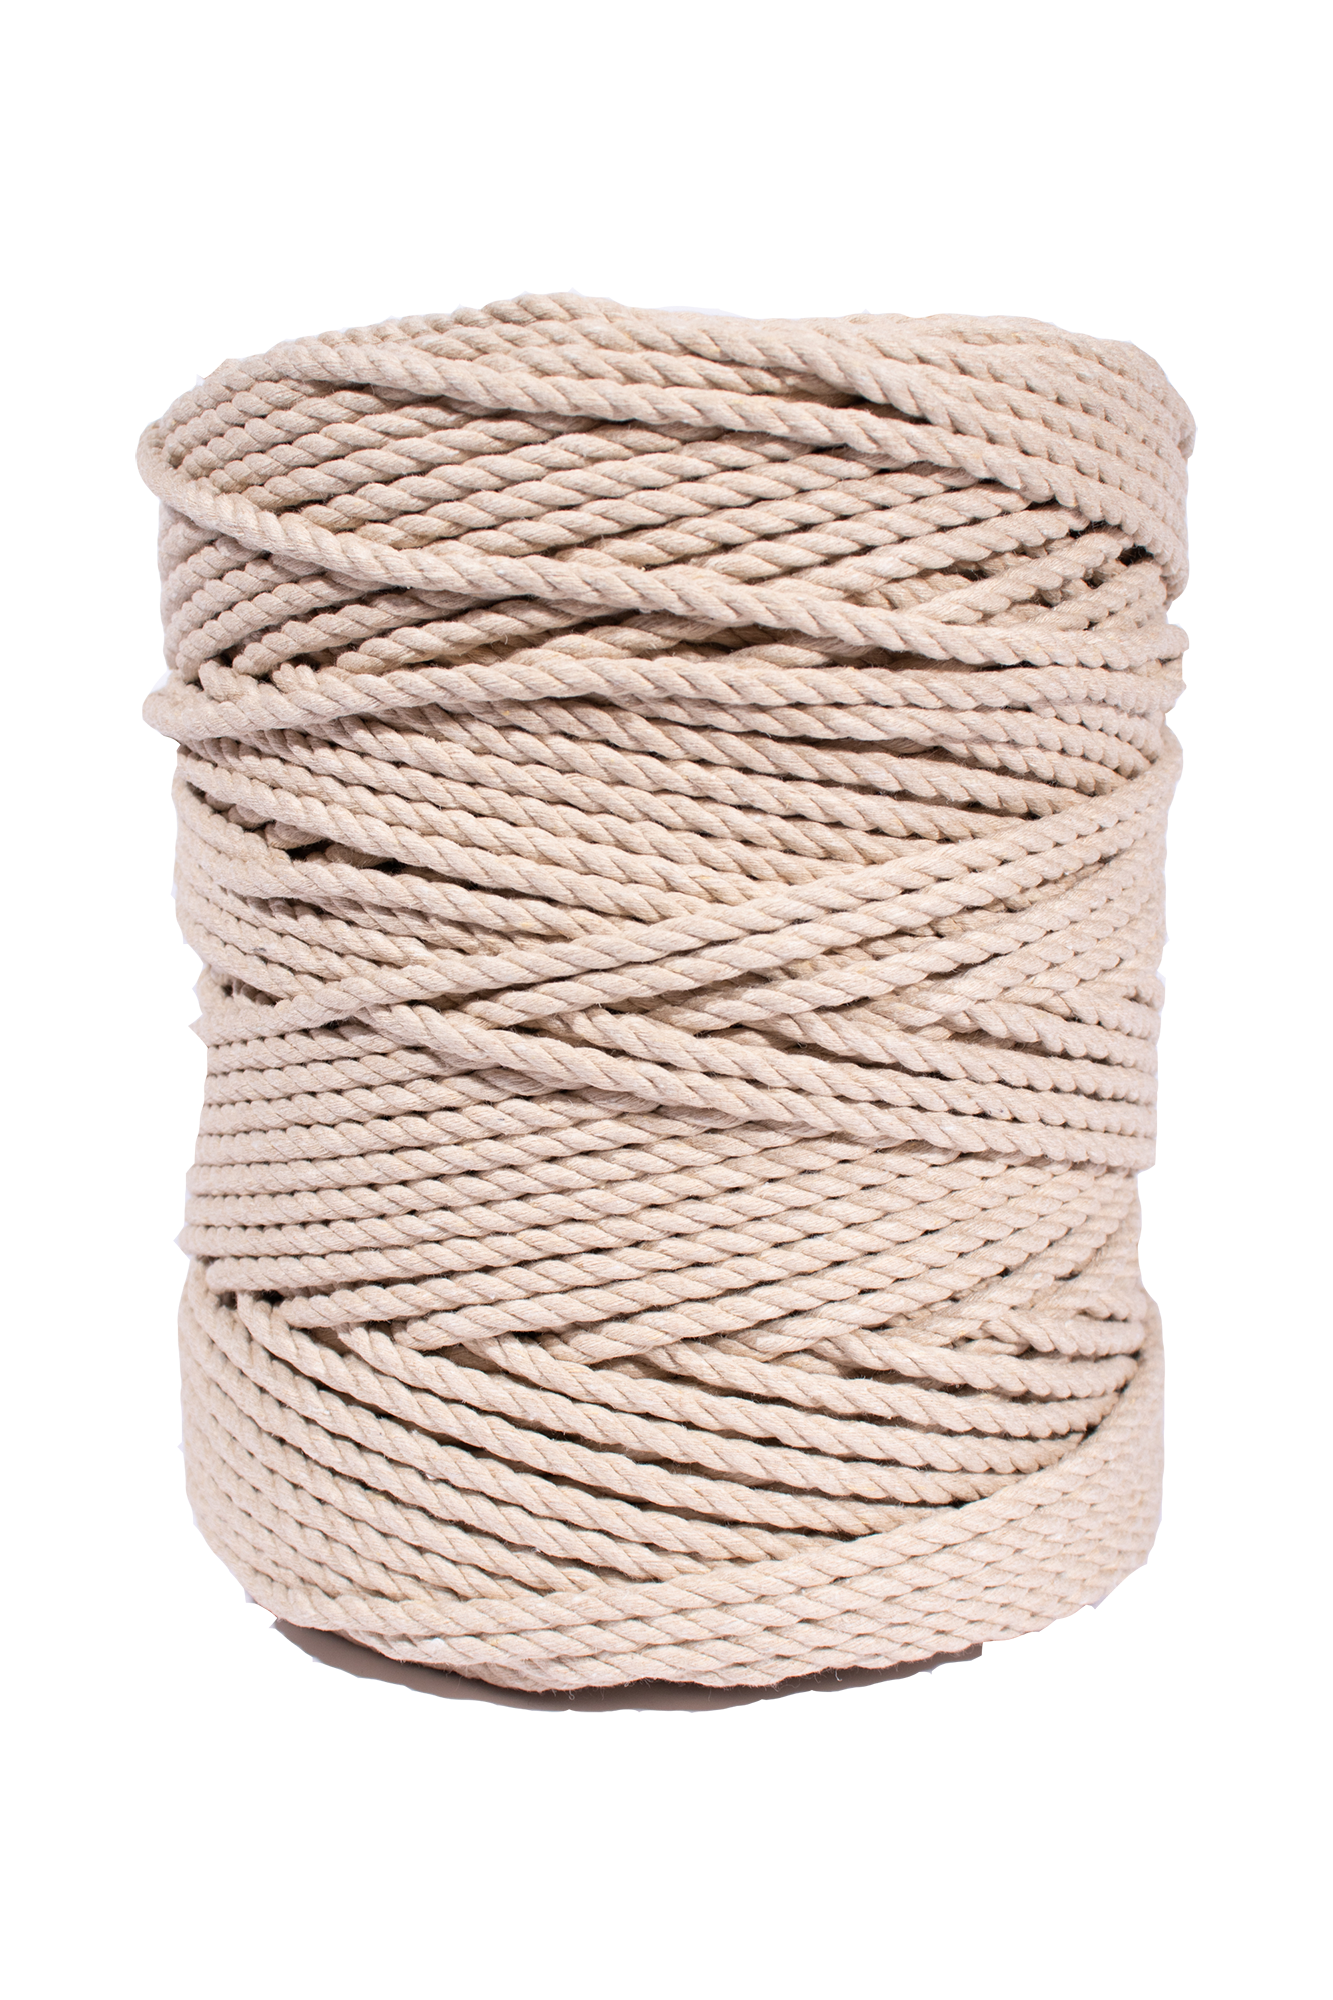 100% Cotton Rope Spool - Made in America - 3/16 Solid Braid Rope — The  Mountain Thread Company (TM)